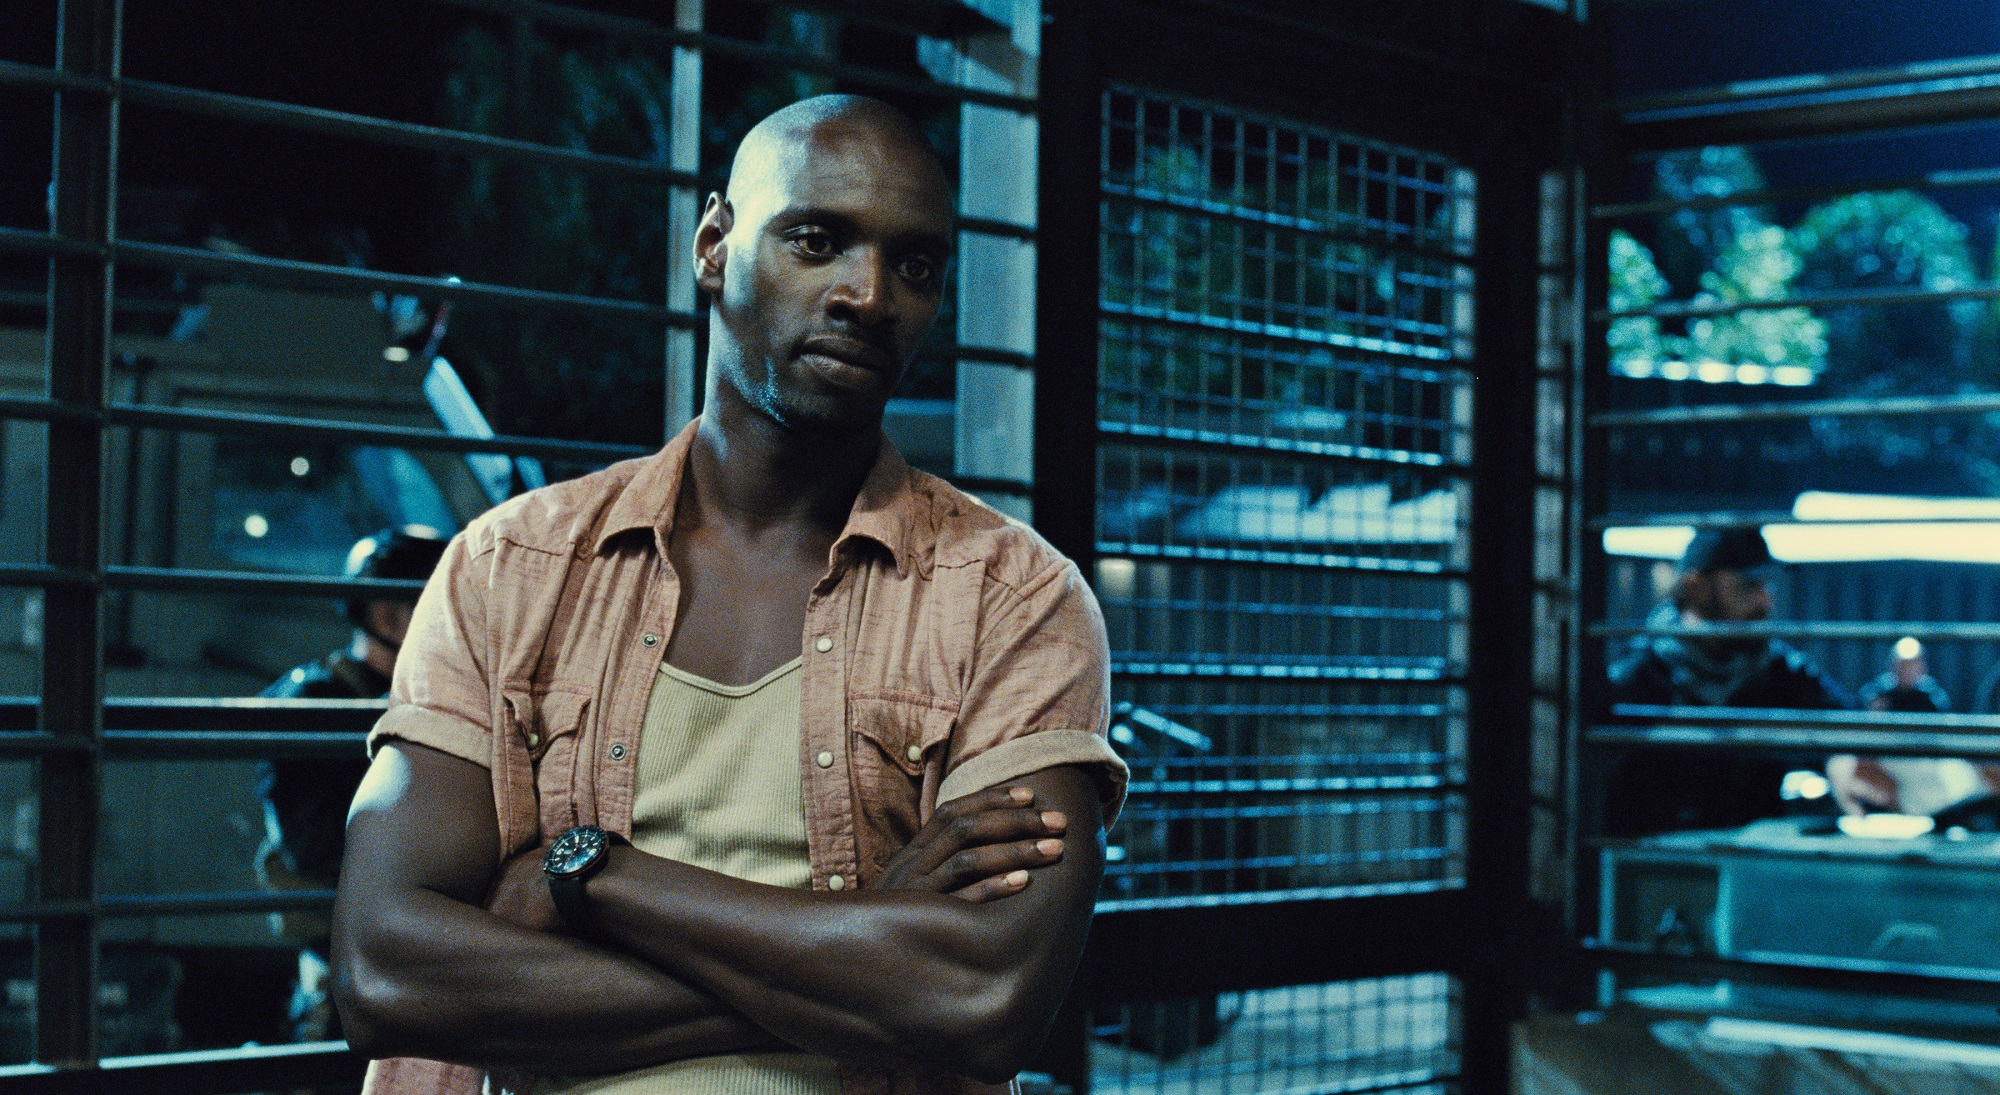 We would like to wish Omar Sy a happy birthday. He is 44 years old today. He played Barry in Jurassic World. 